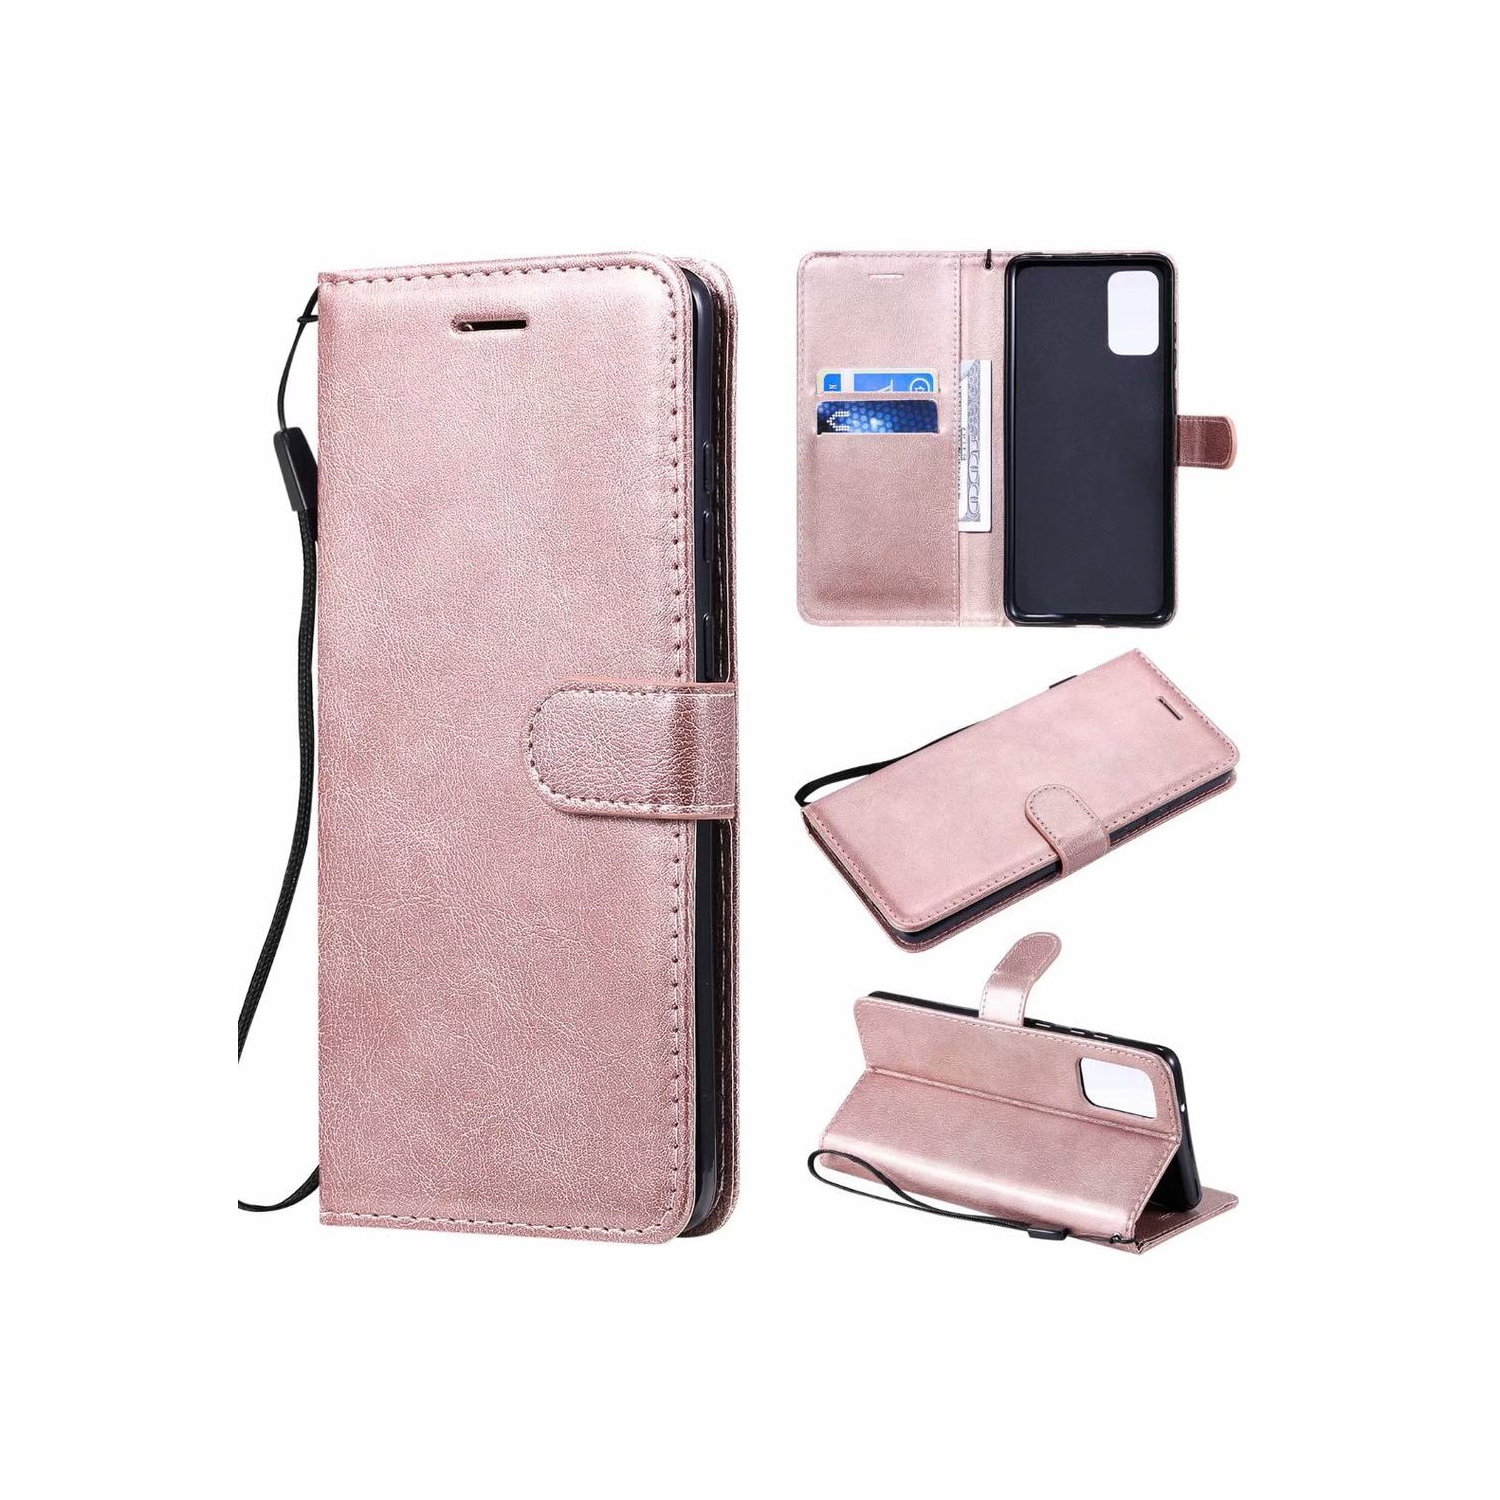 [CS] Samsung Galaxy A32 4G 6.4" Case, Magnetic Leather Folio Wallet Flip Case Cover with Card Slot, Rose Gold